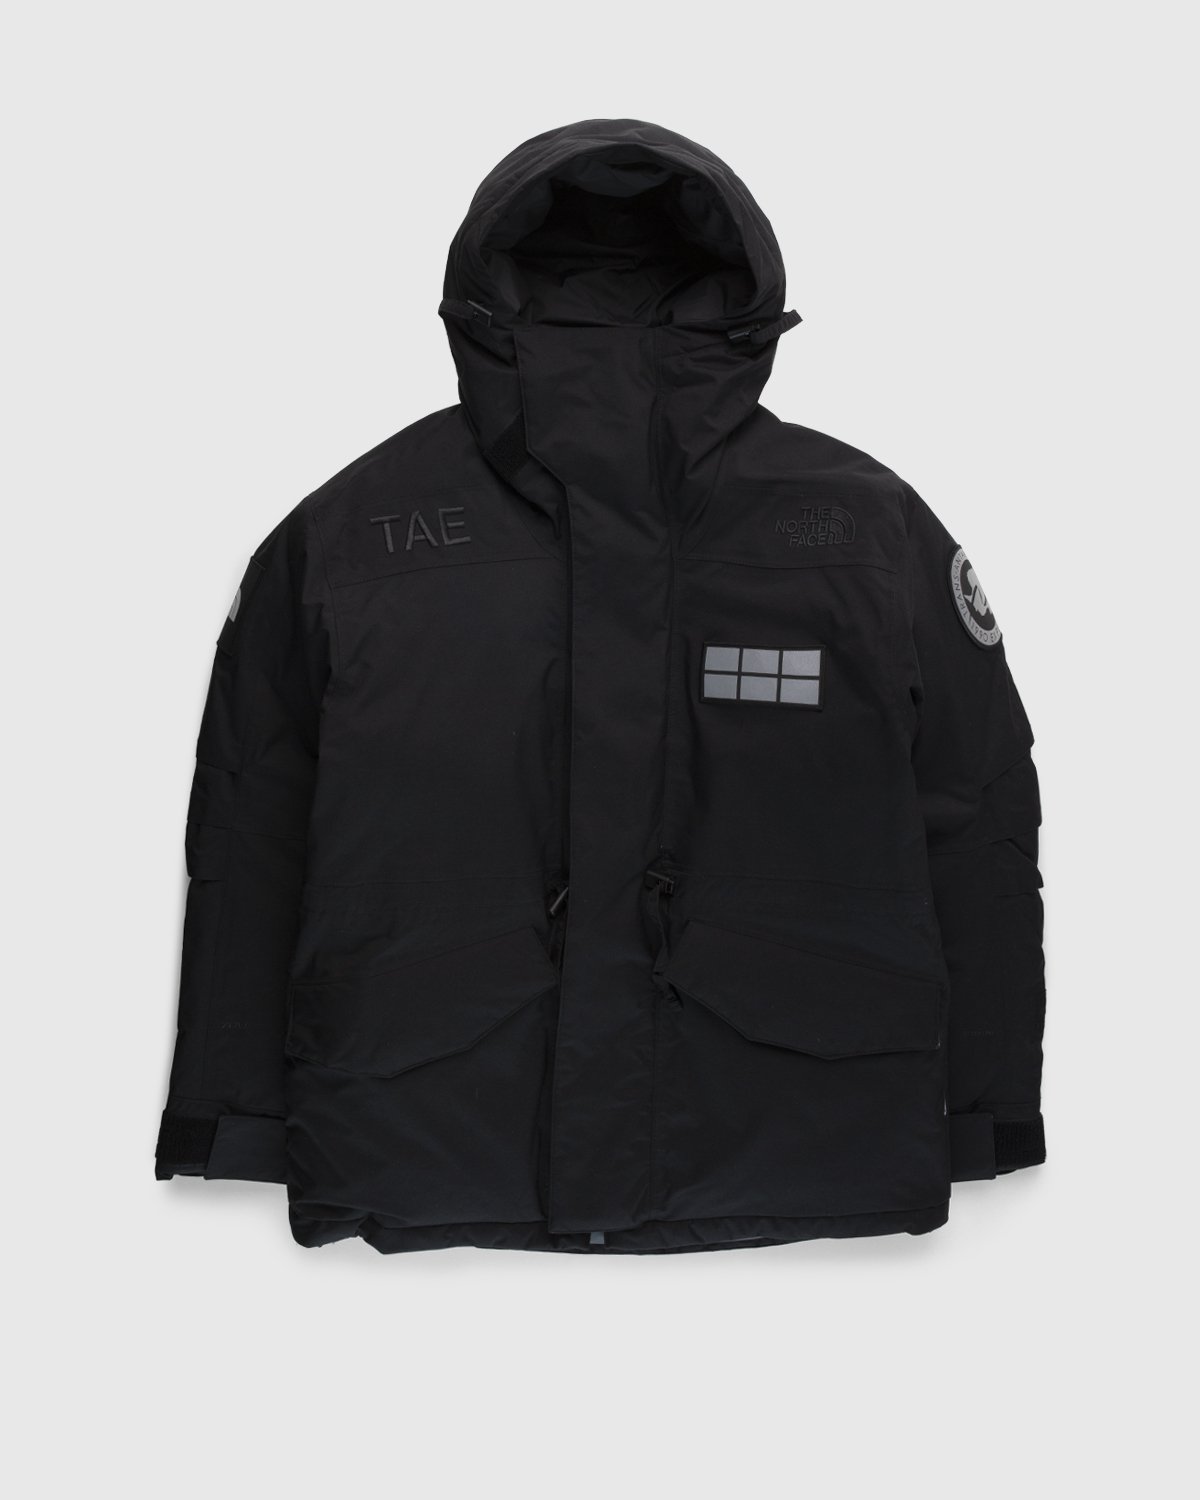 The North Face - Trans Antarctica Expedition Parka Black - Clothing - Black - Image 1